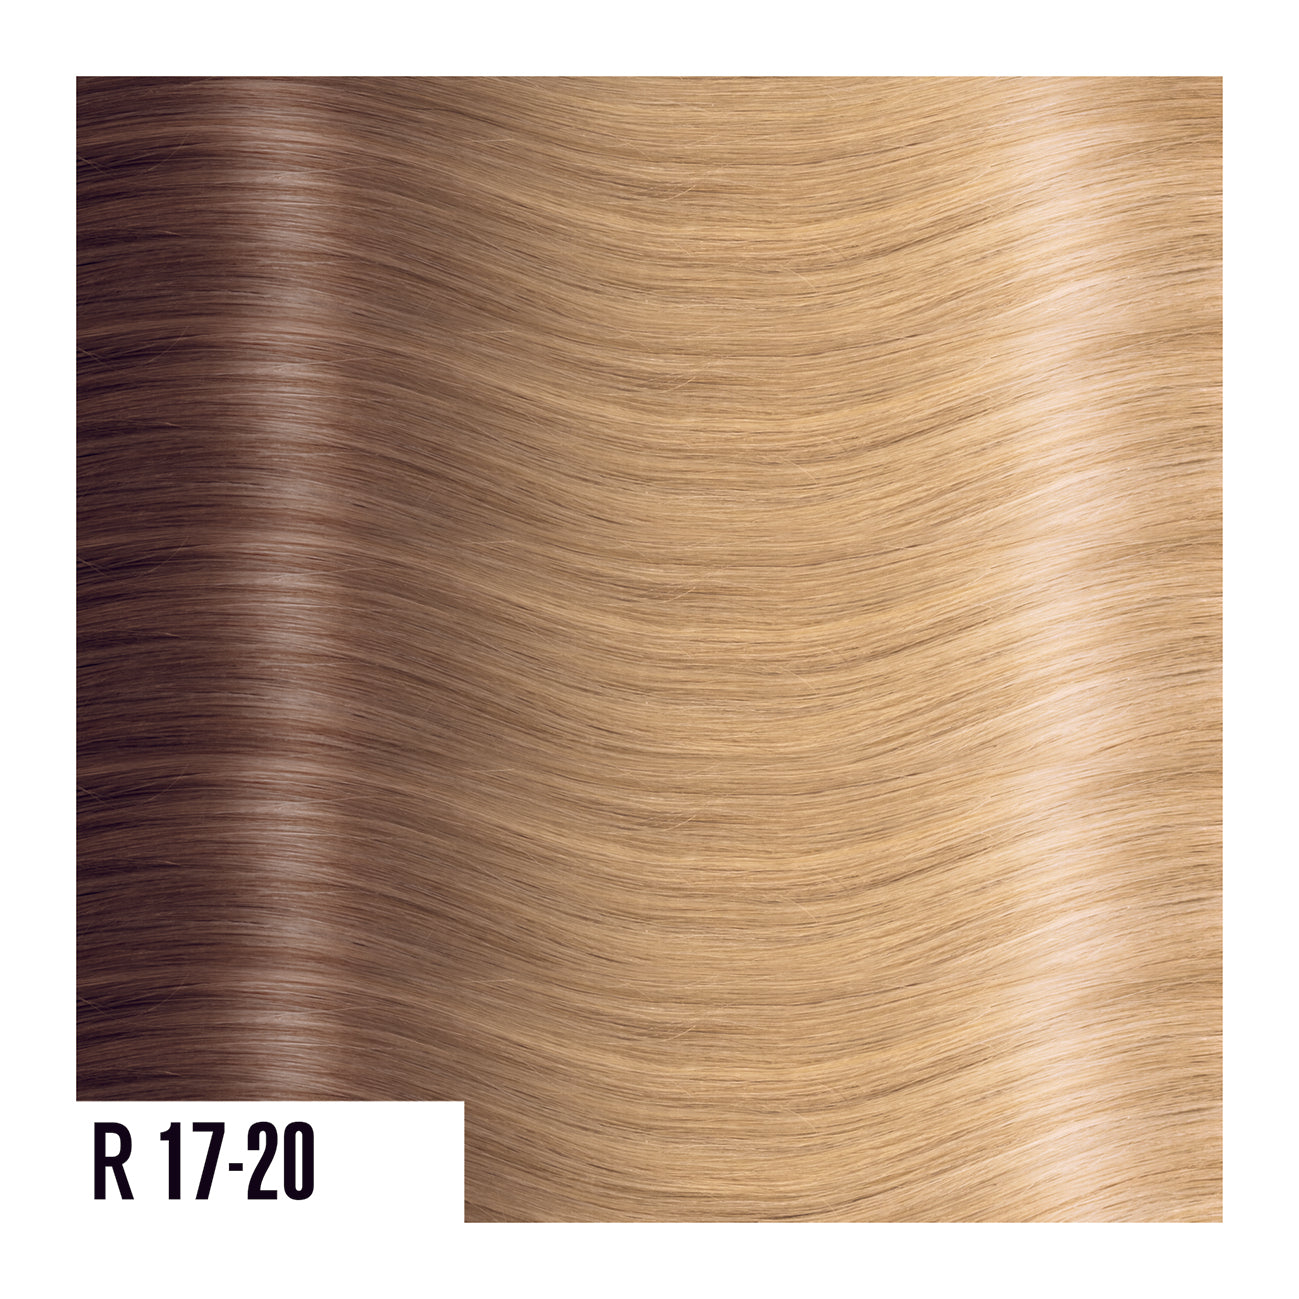 R17-20 - Rooted Prime Fashion Tape In Warm Light Brown Fade Into Golden Light Blonde - Ombre colors are a beautiful gradual blend of 3 colors with darker roots and lighter ends. 